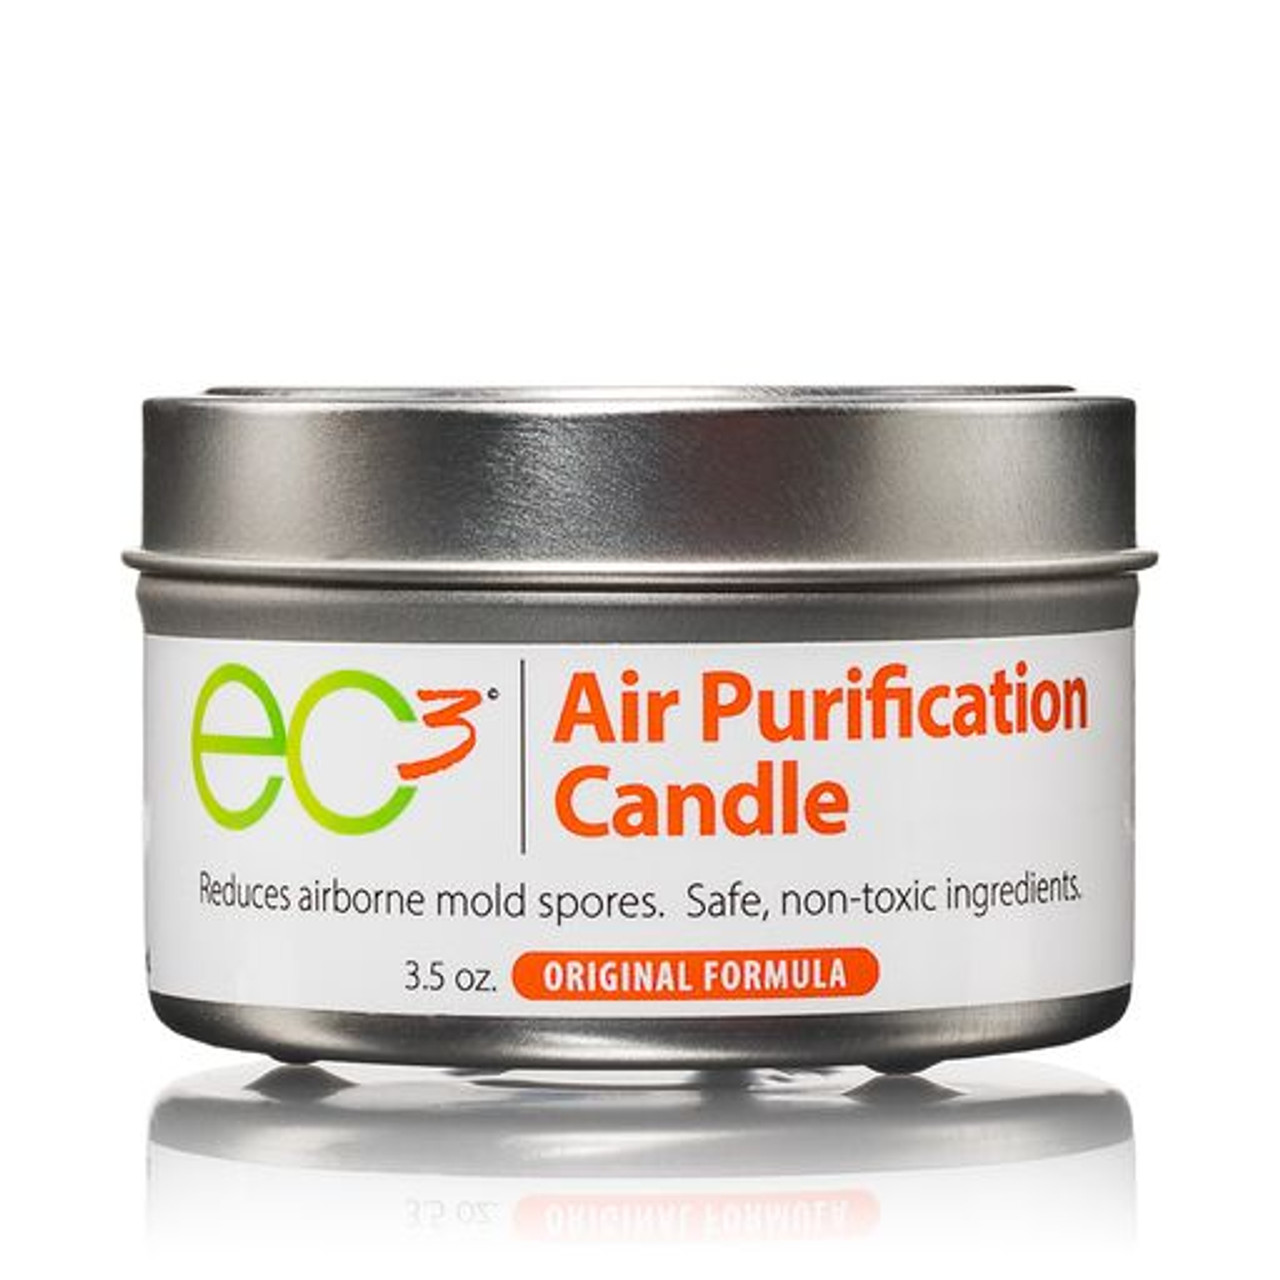 EC3 Air Purification Candle  Reduce the Mold Count in Your Home